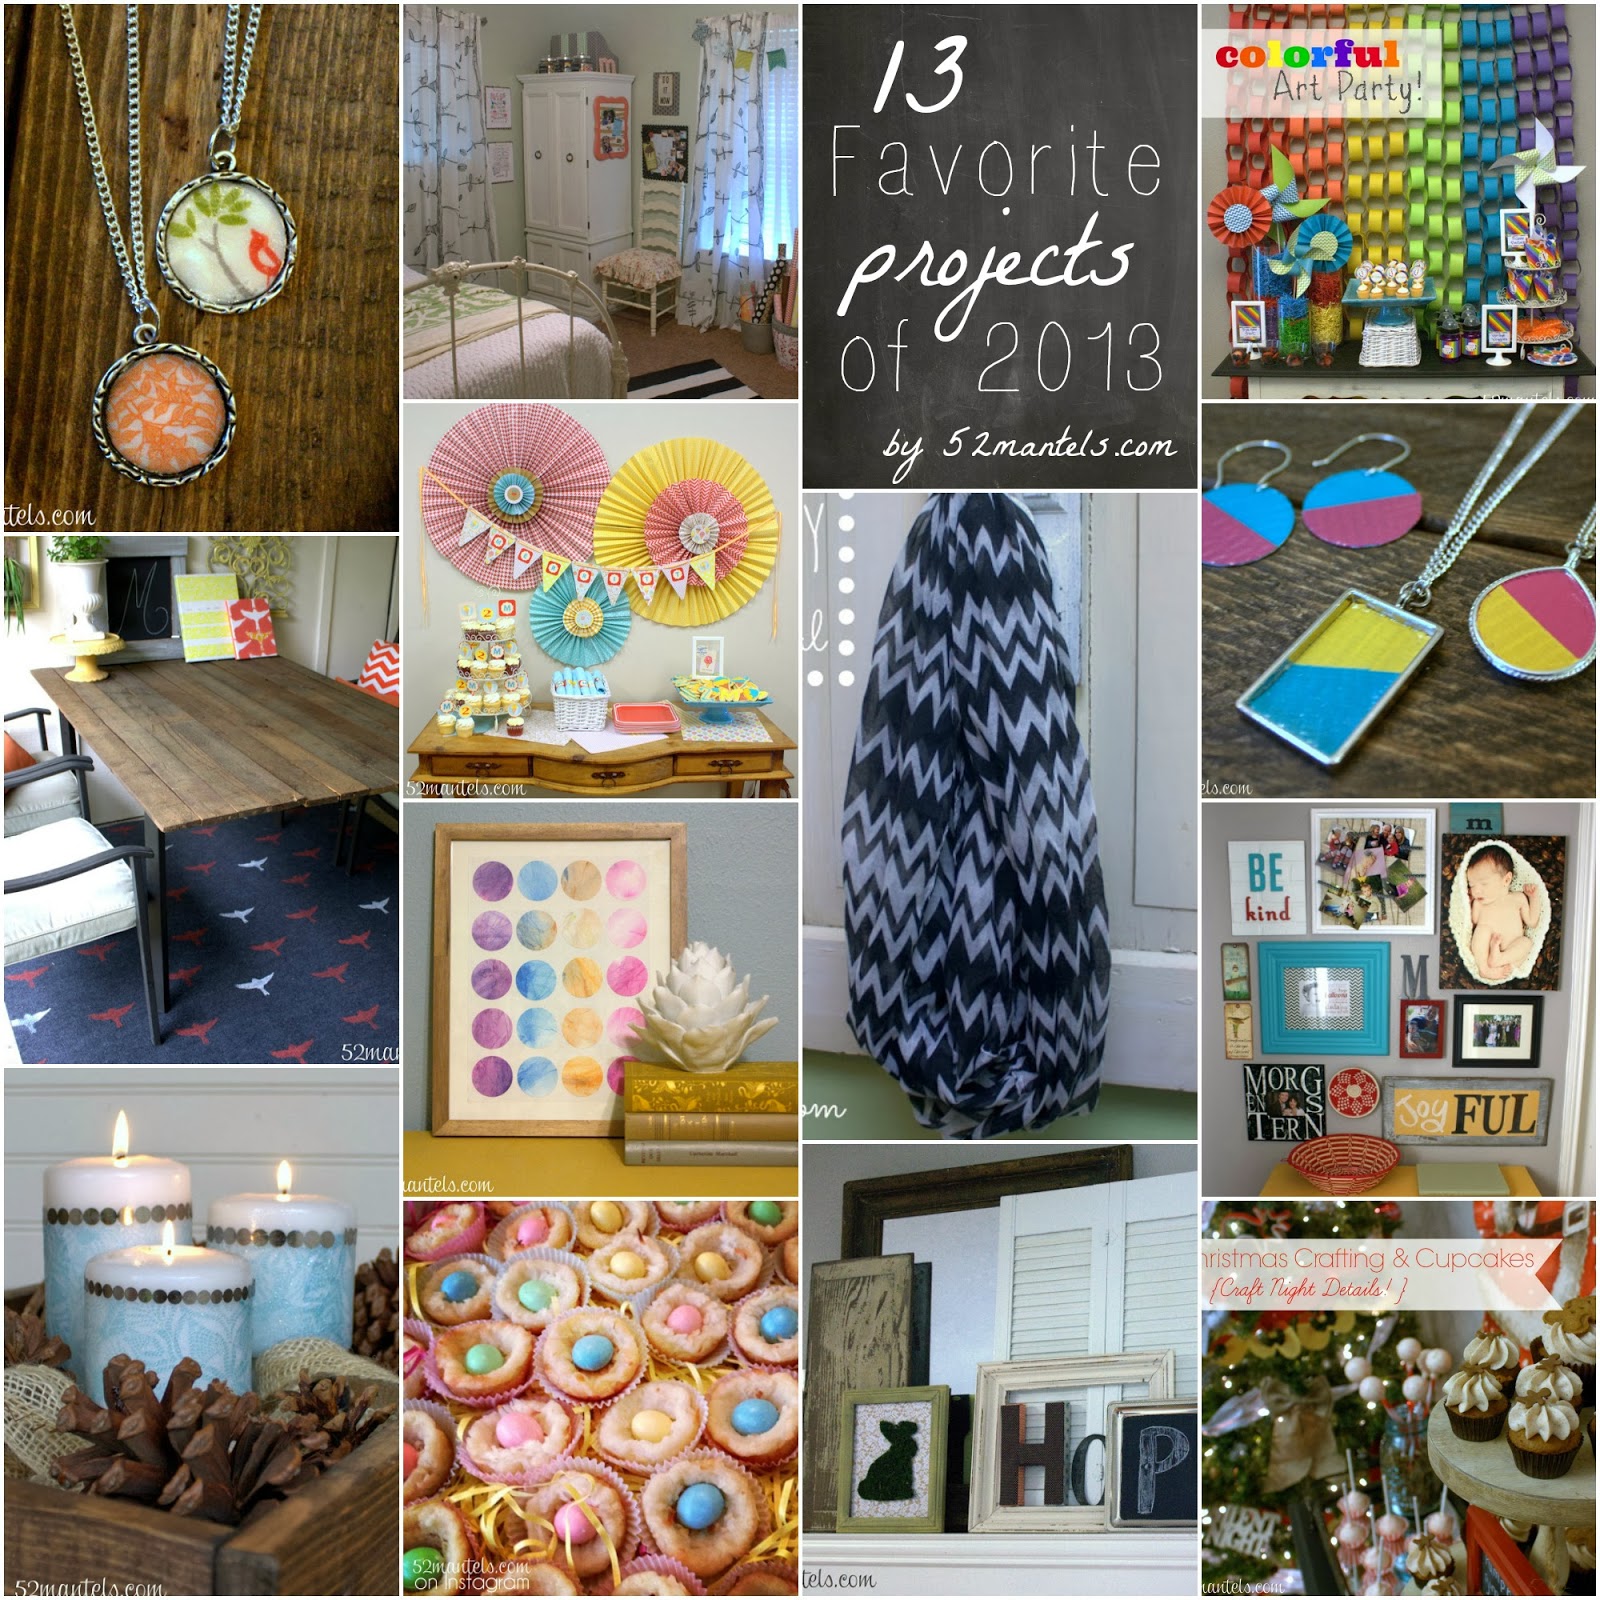 52 Mantels: 13 Favorite Projects of 2013